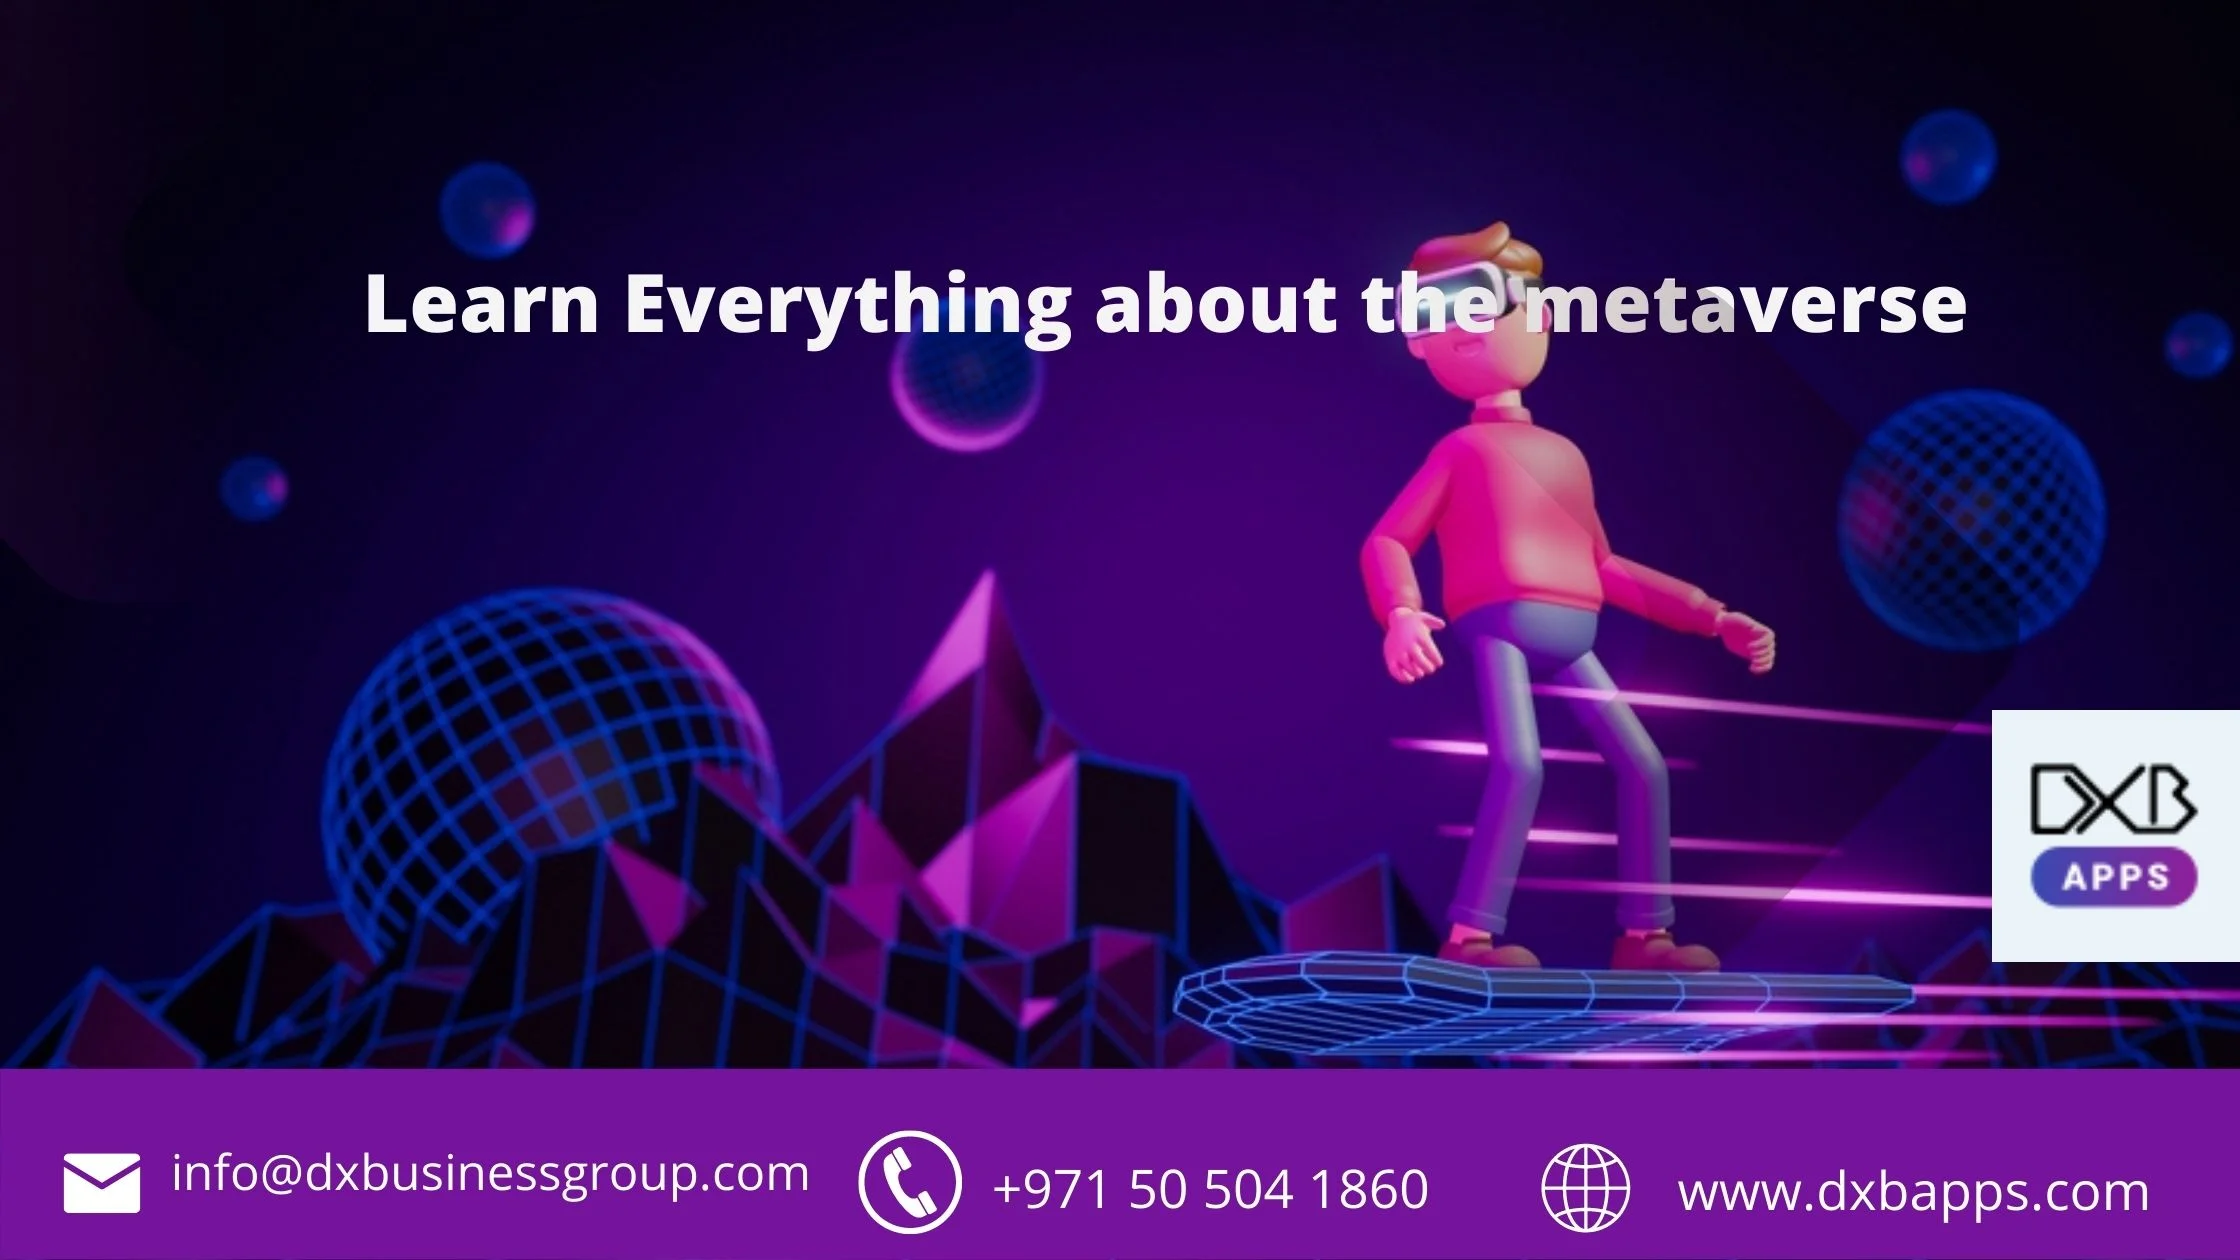 Learn Everything about the metaverse